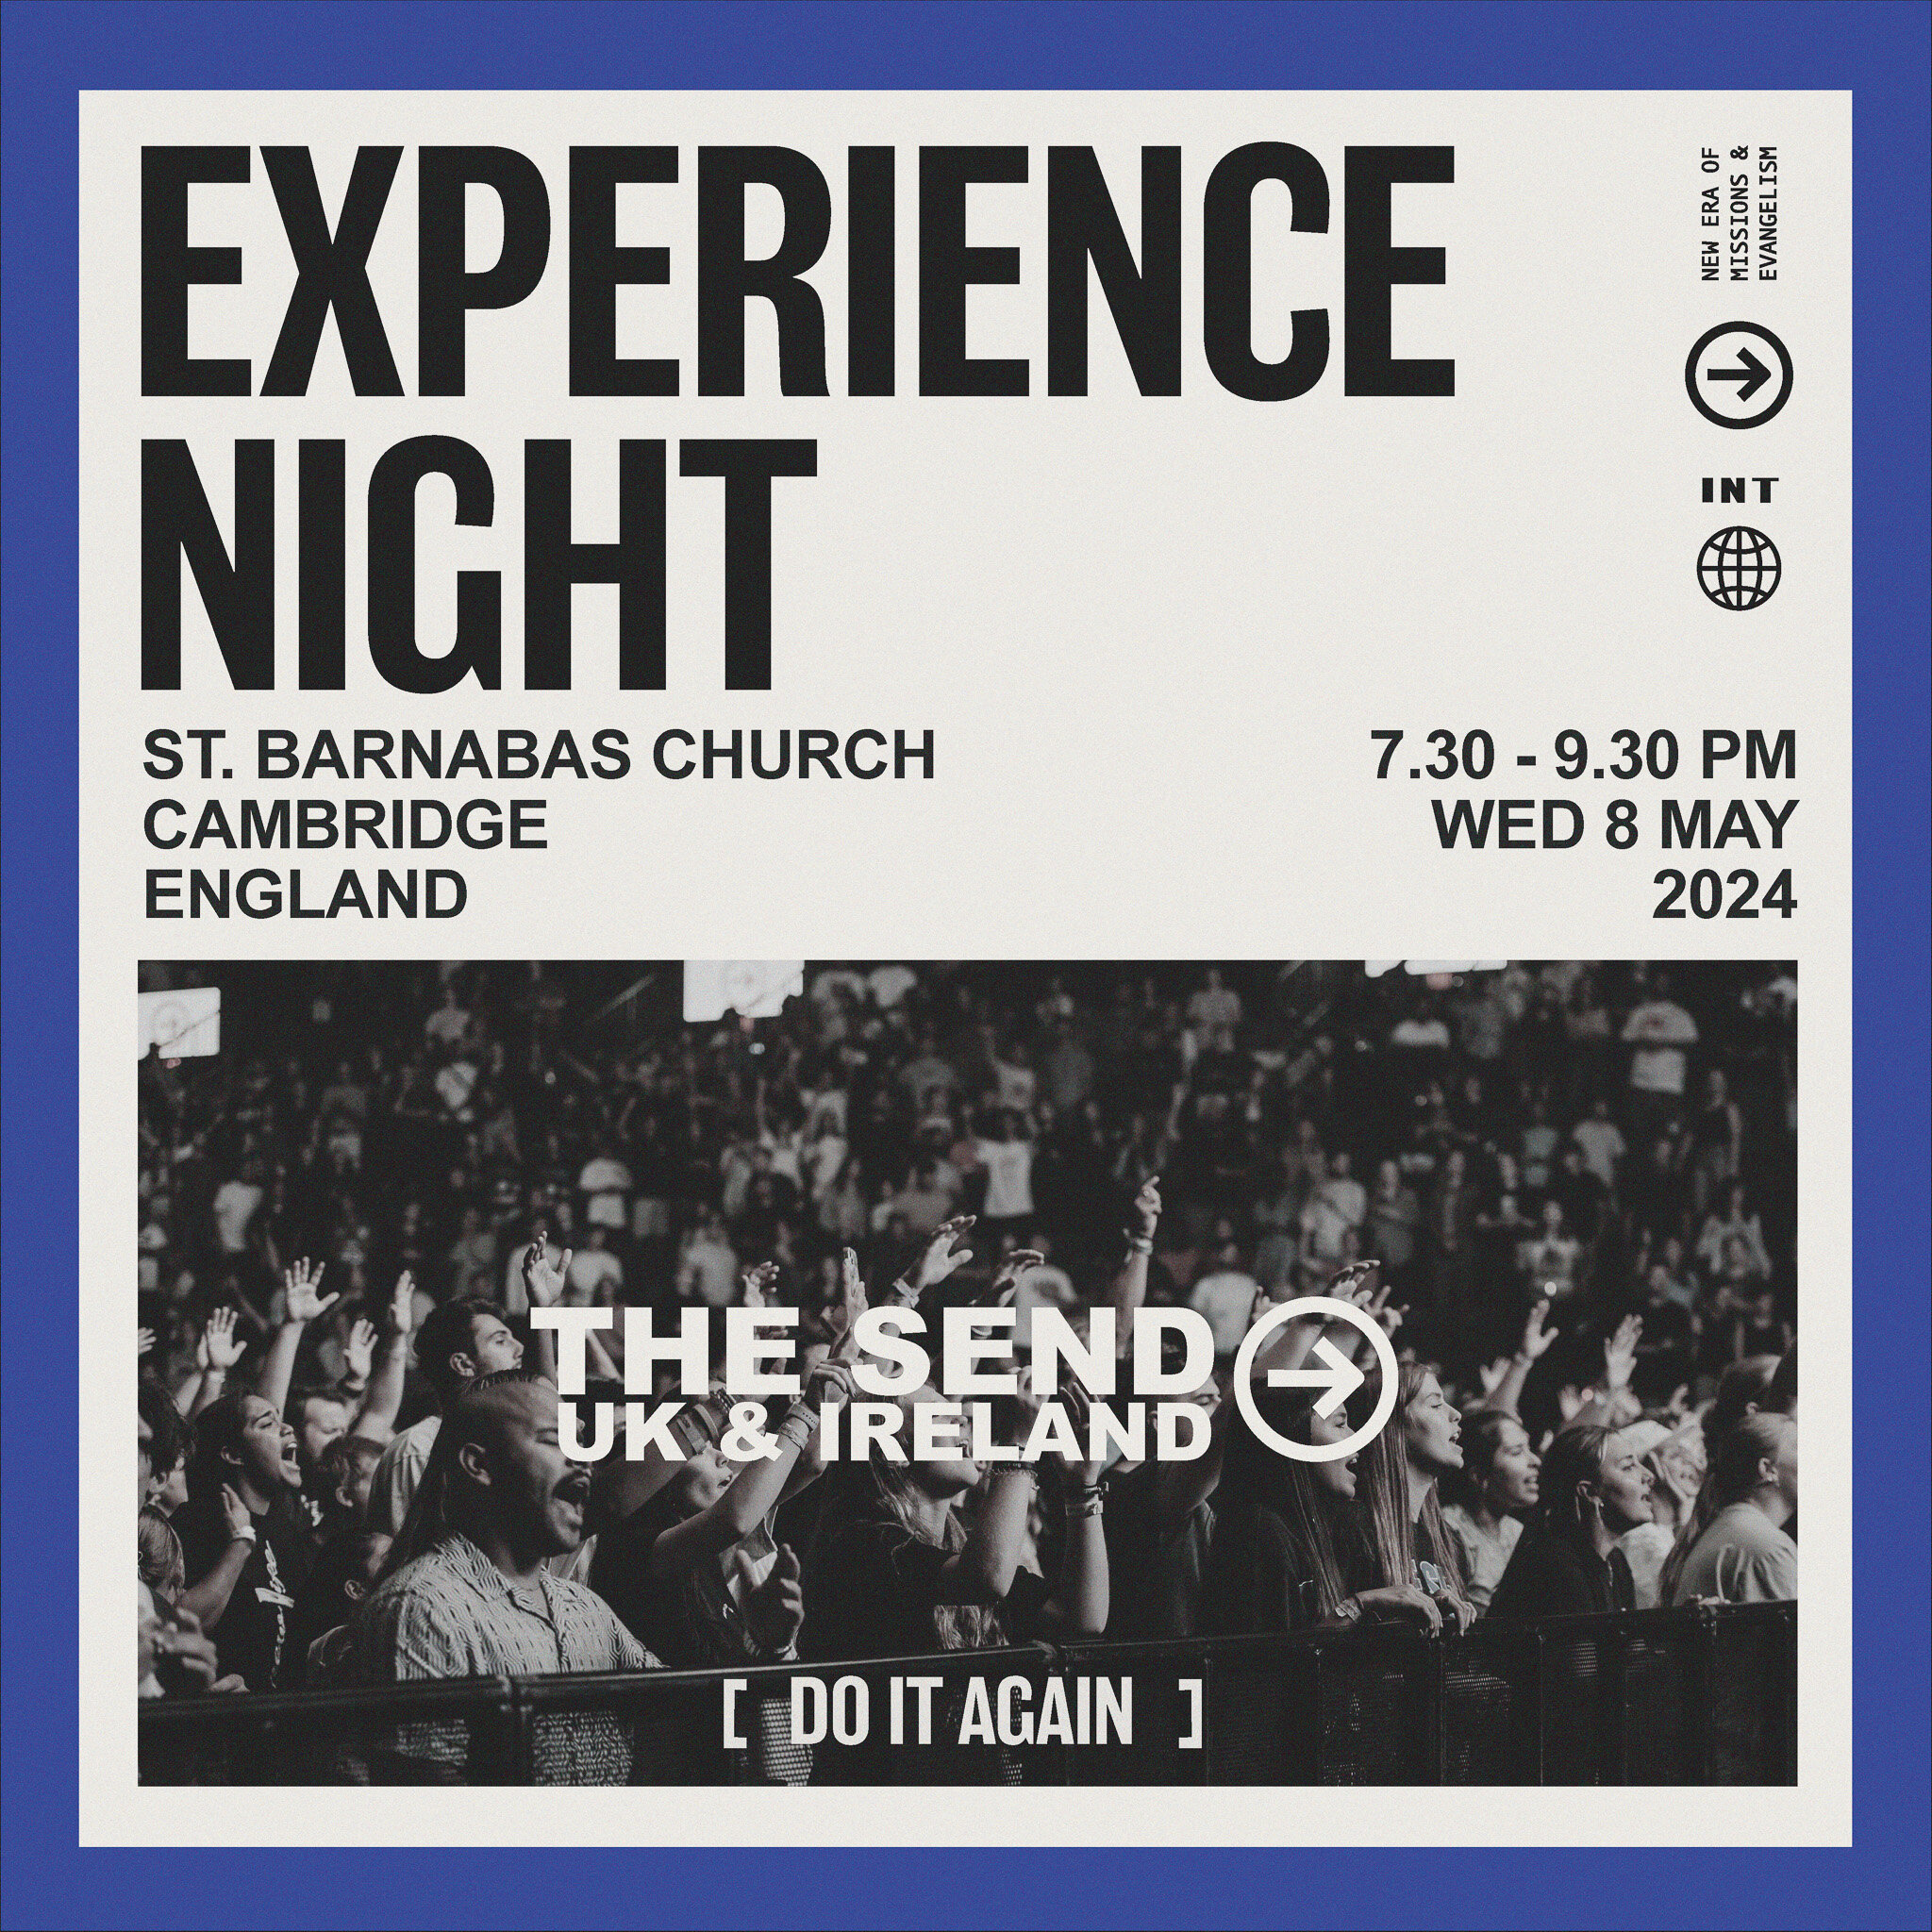 SAVE THE DATE!

We are so excited to be hosting @thesend.uk.ie Experience Night on 8th May.

THE SEND Experience Nights are city-wide gatherings that give a taste of what THE SEND is, calling young adults to live all-in for Jesus and take their place